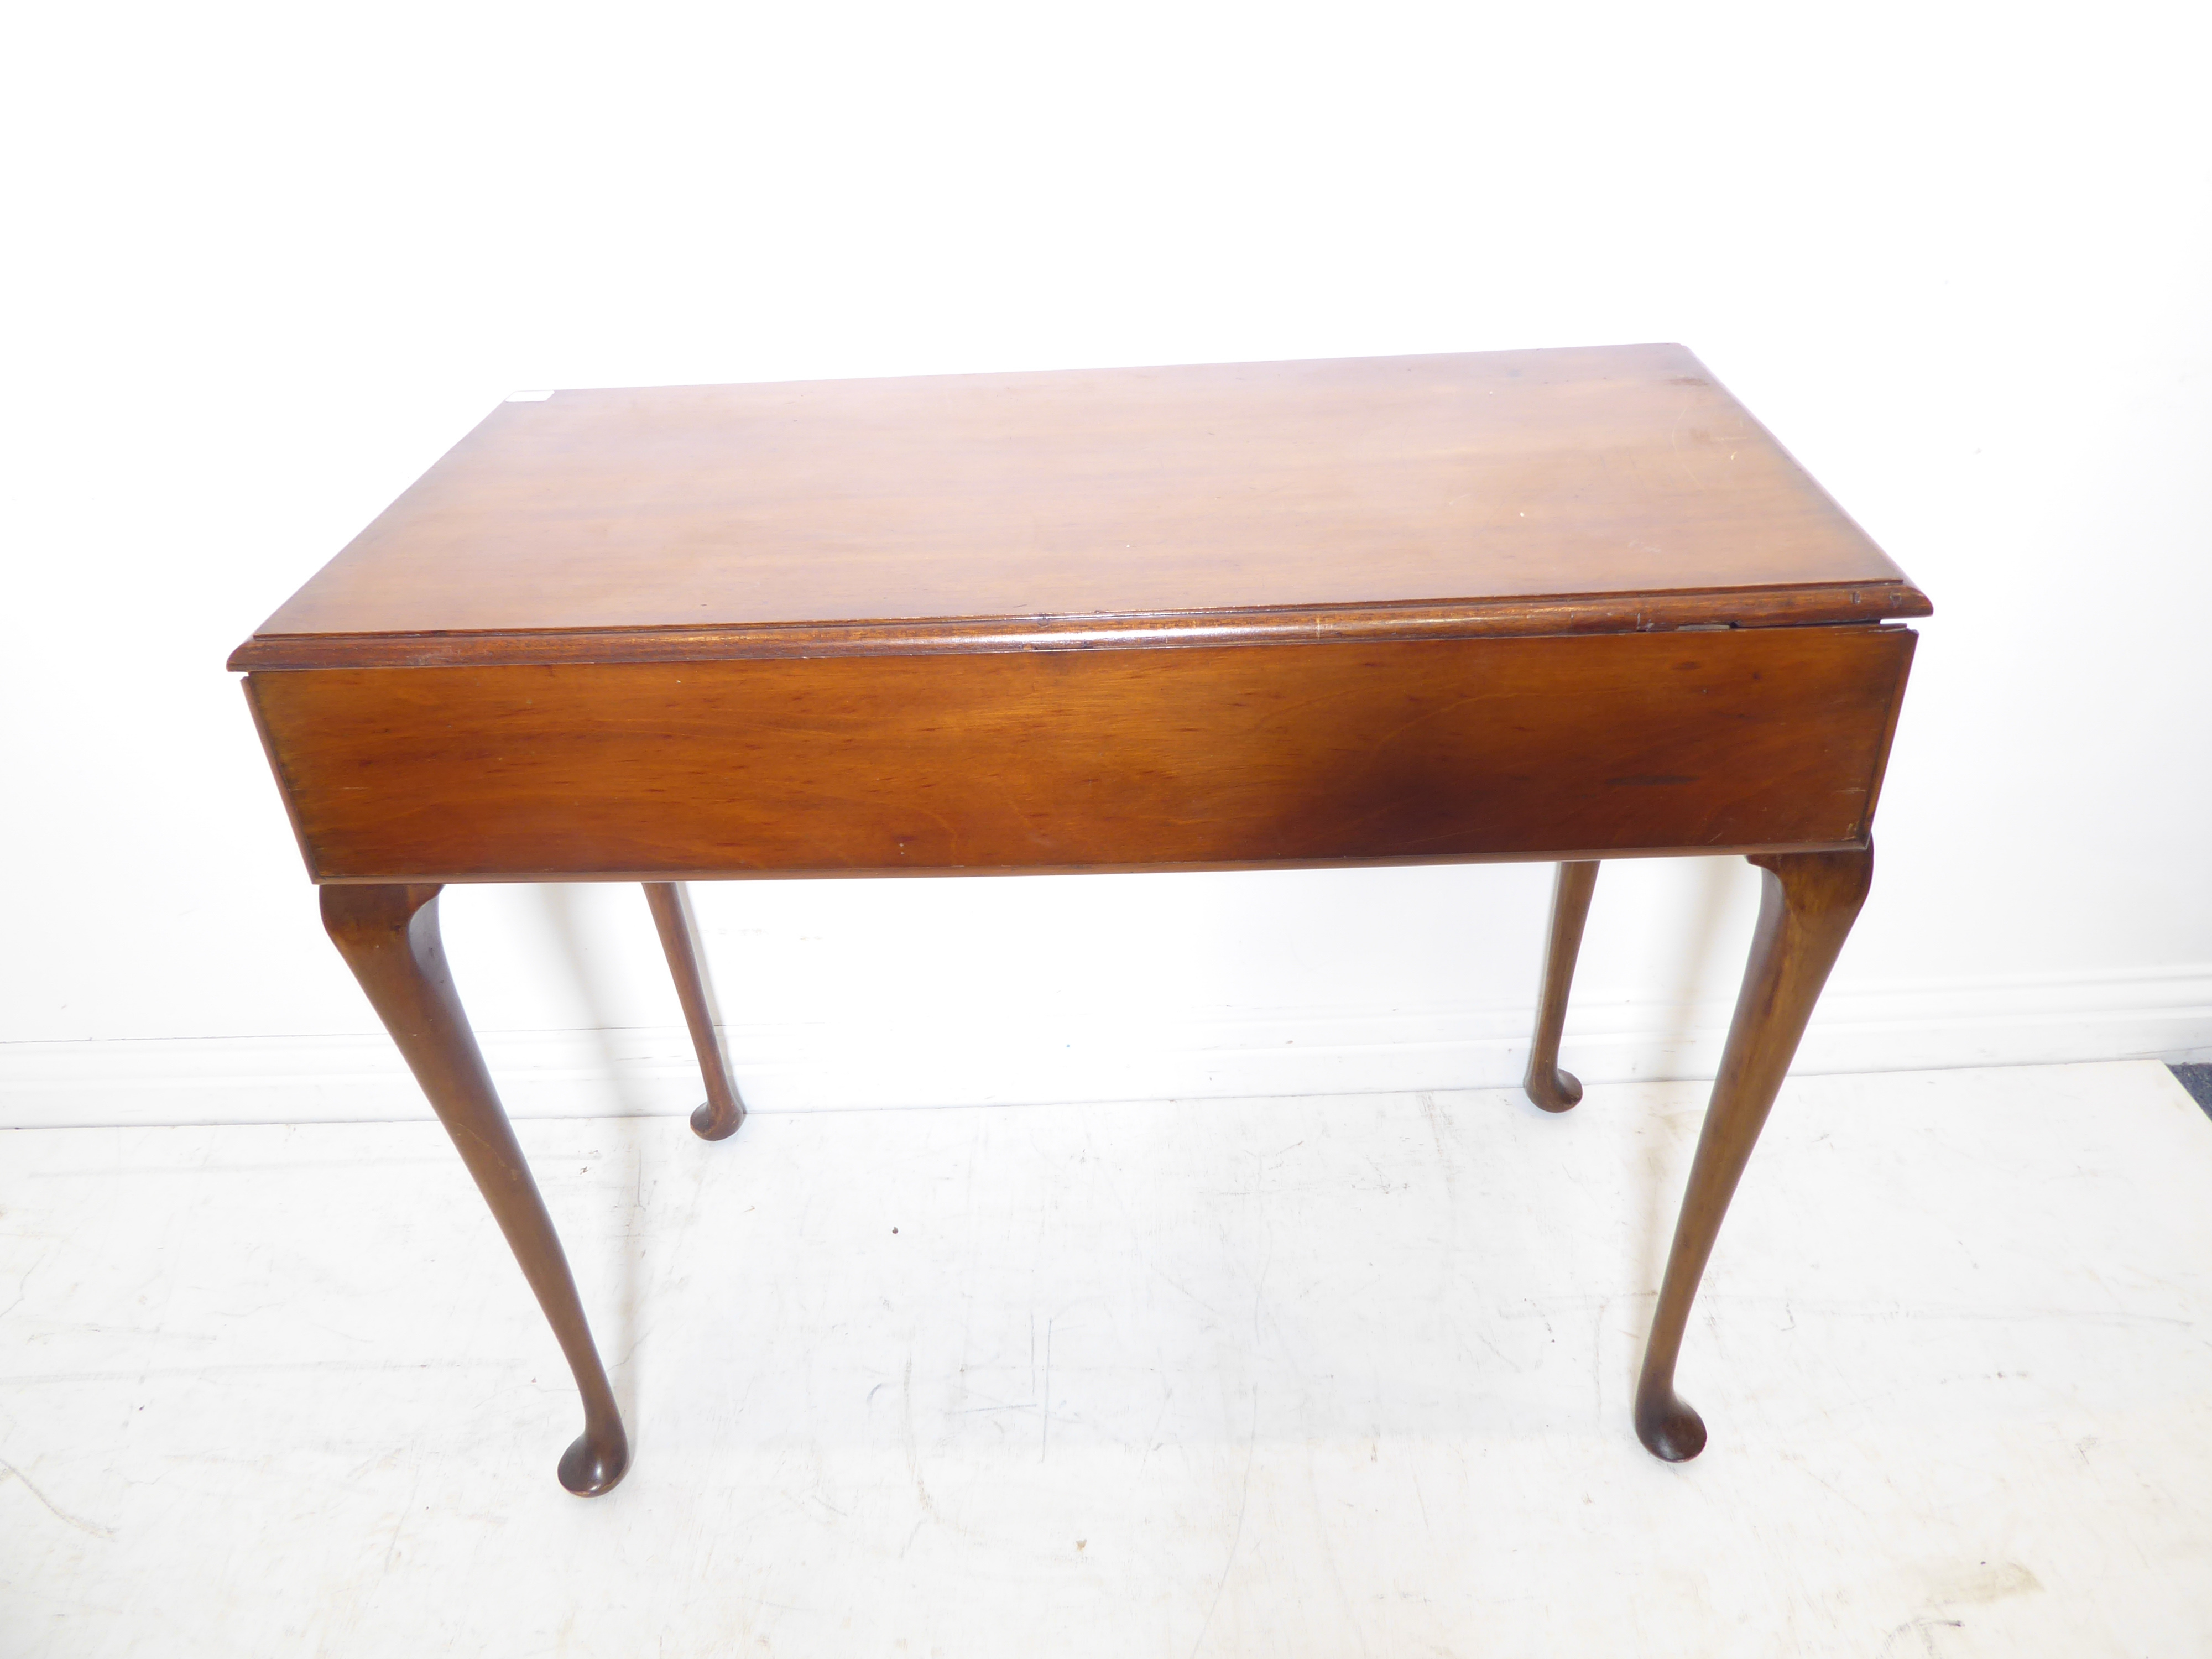 An early 20th century mahogany side table in Georgian-style – the thumbnail moulded top above a - Image 4 of 4